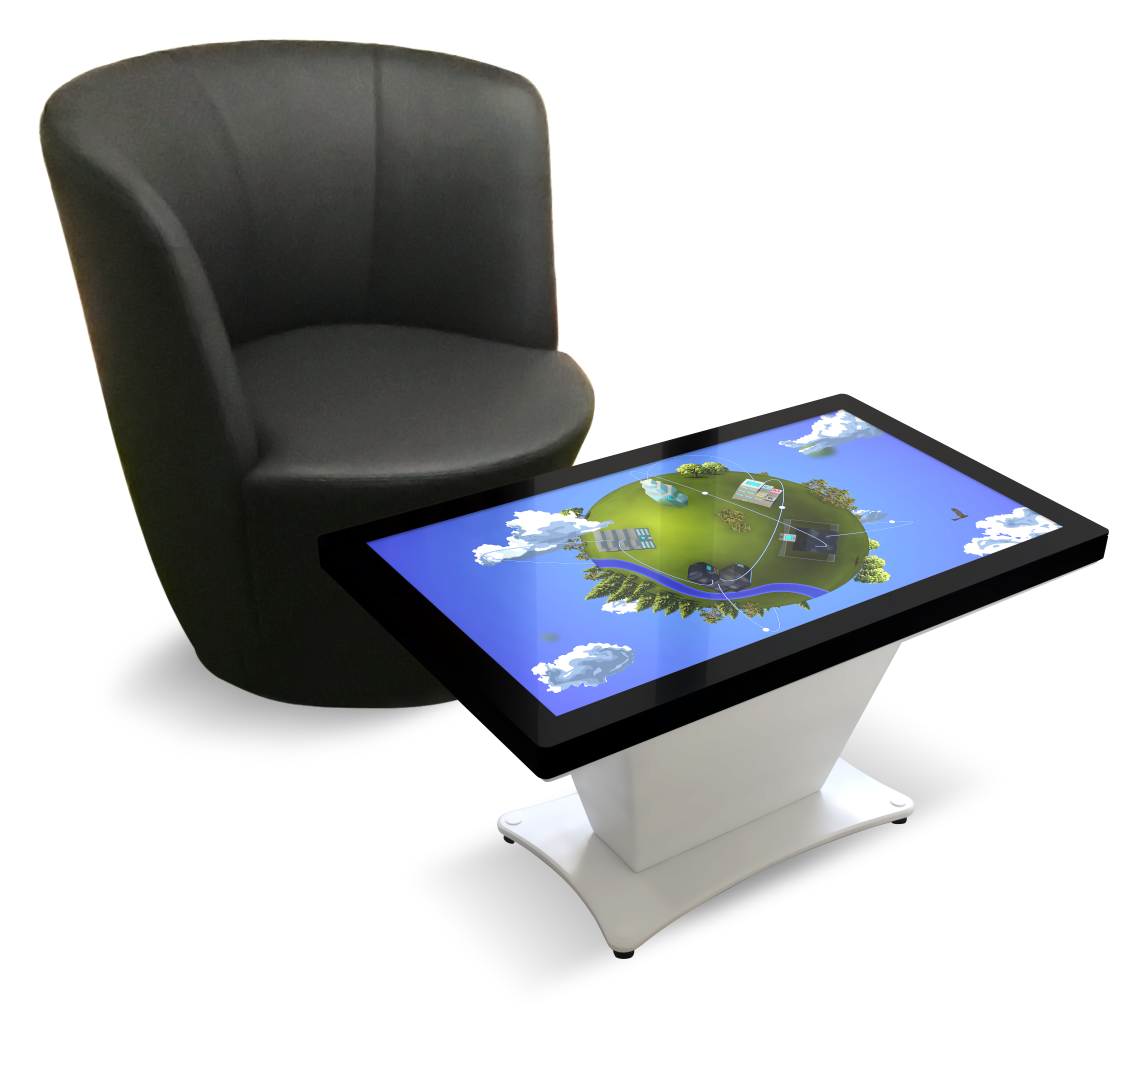 11 Lessons We Learned about Touch Screen Tables | by Christian Schüler |  Medium